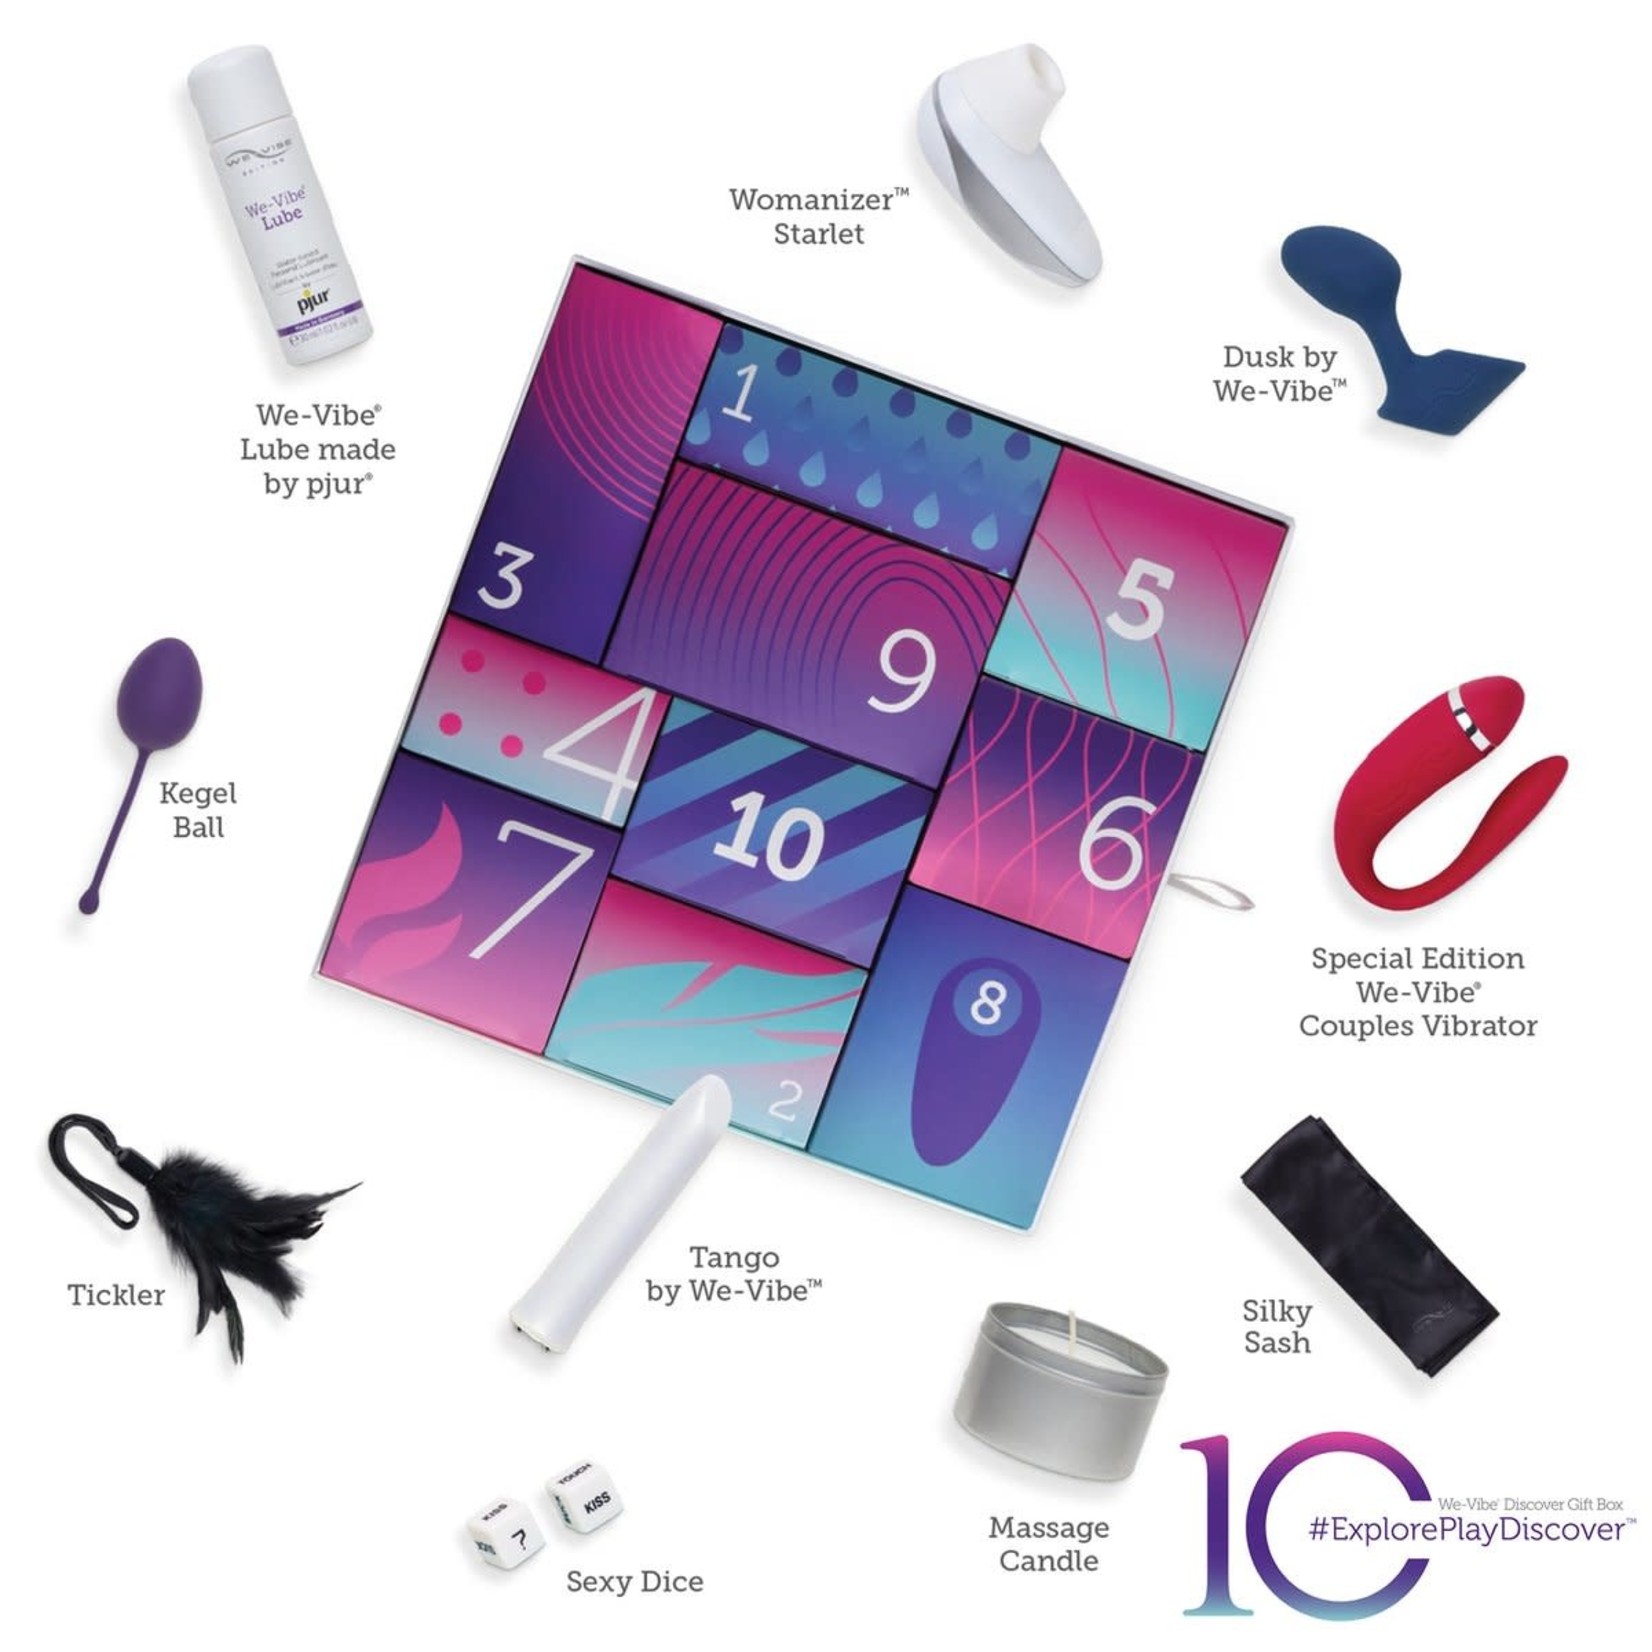 WE-VIBE WE VIBE DISCOVER GIFT BOX - ANNIVERSARY COLLECTION